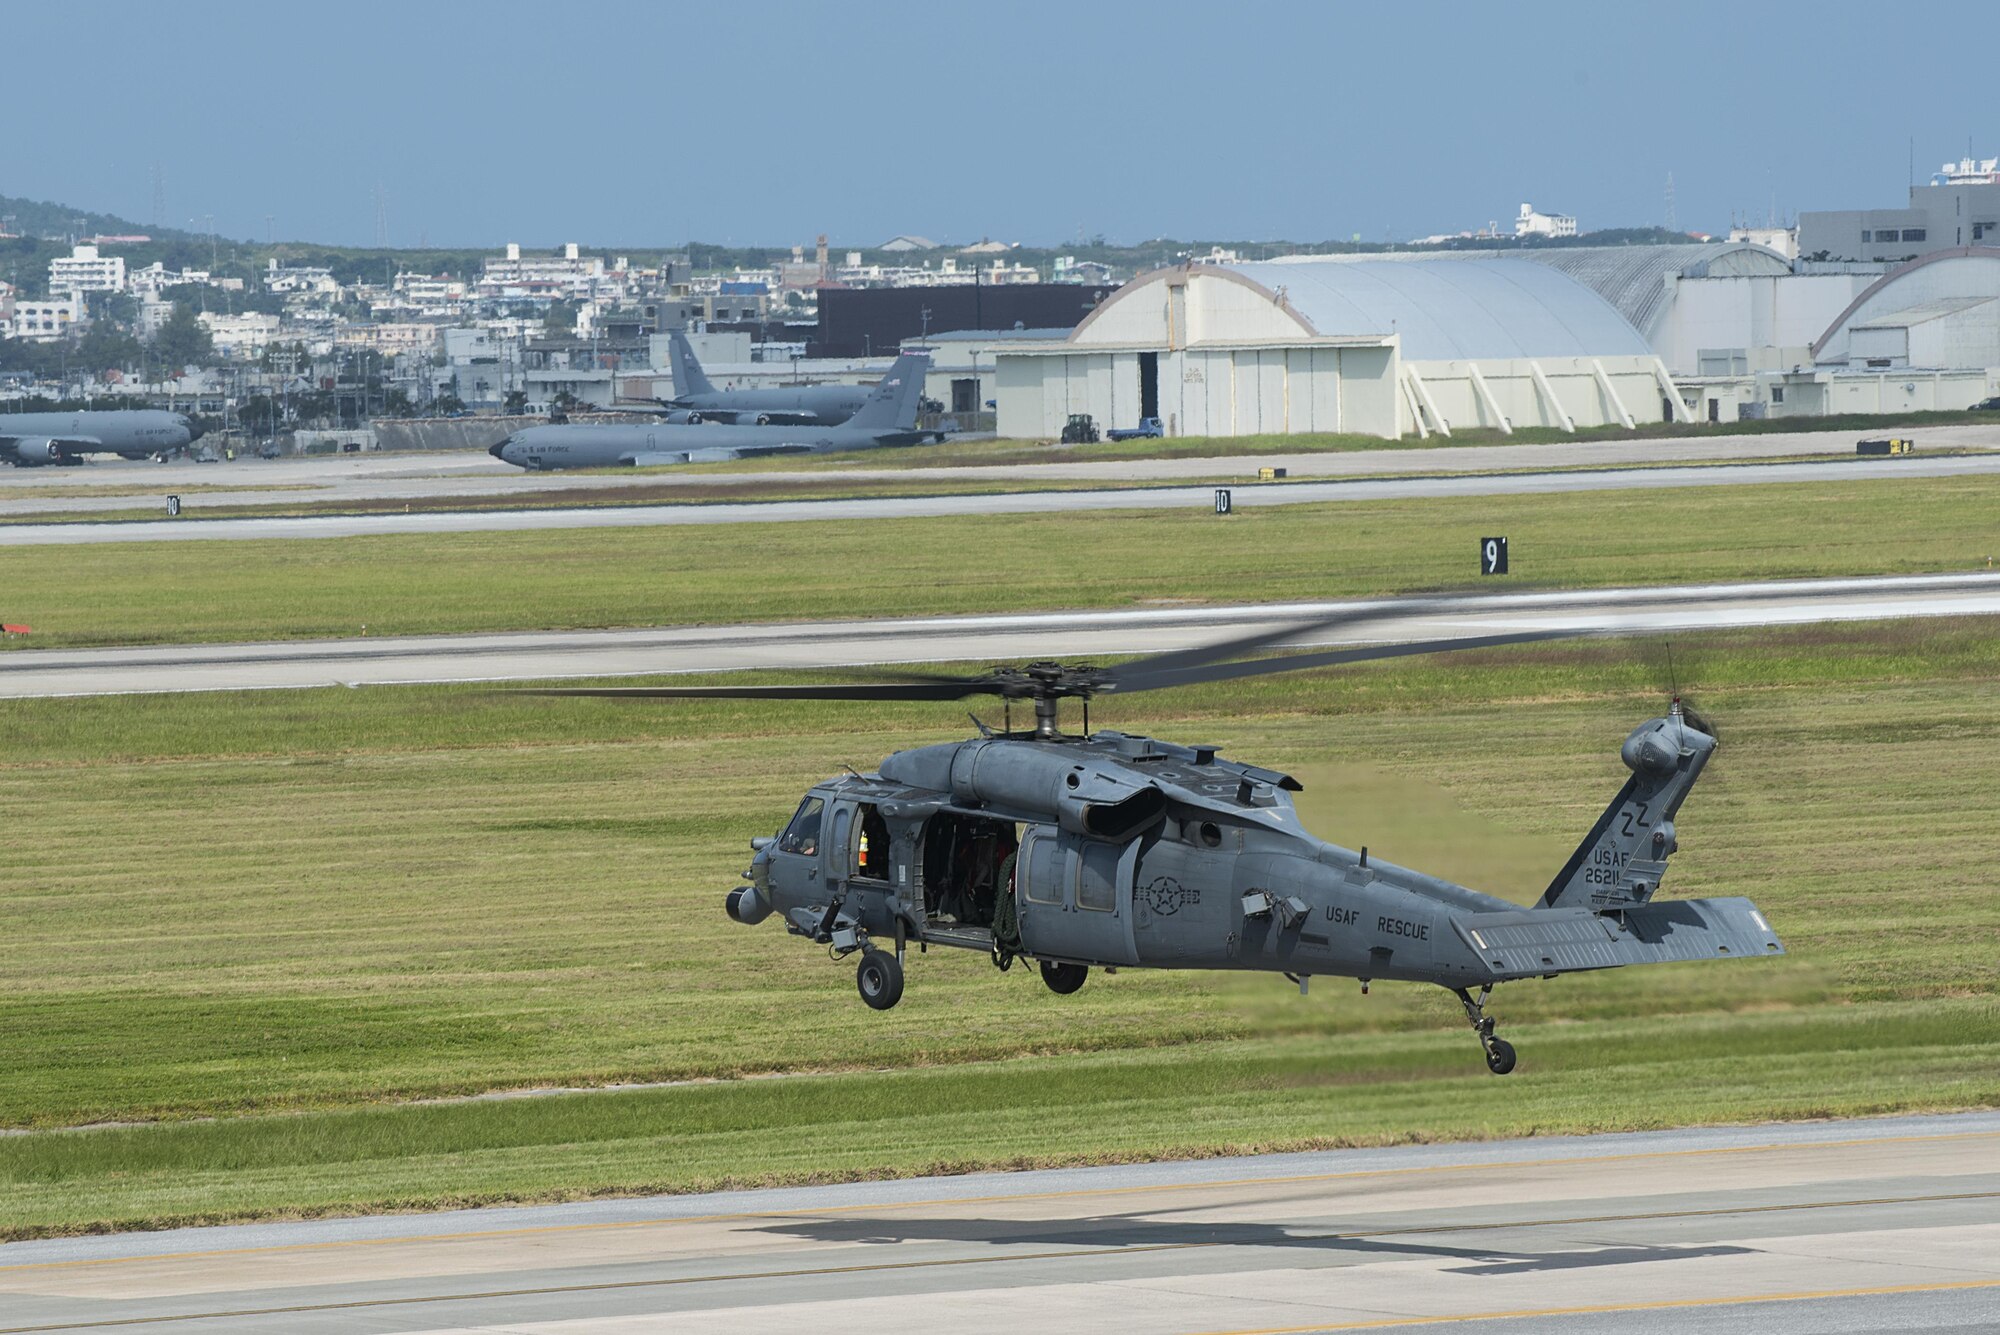 An HH-60 Pave Hawk from the 33rd Rescue Squadron takes off during Exercise Keen Sword 17 Nov. 8, 2016, at Kadena Air Base, Japan. Significant training activities during Keen Sword 17 include air and sea operations, integrated air and missile defense and ballistic missile defense in order to keep pace with the growing ballistic missile threat in the Indo-Asia-Pacific region. (U.S. Air Force photo by Airman 1st Class Corey M. Pettis)